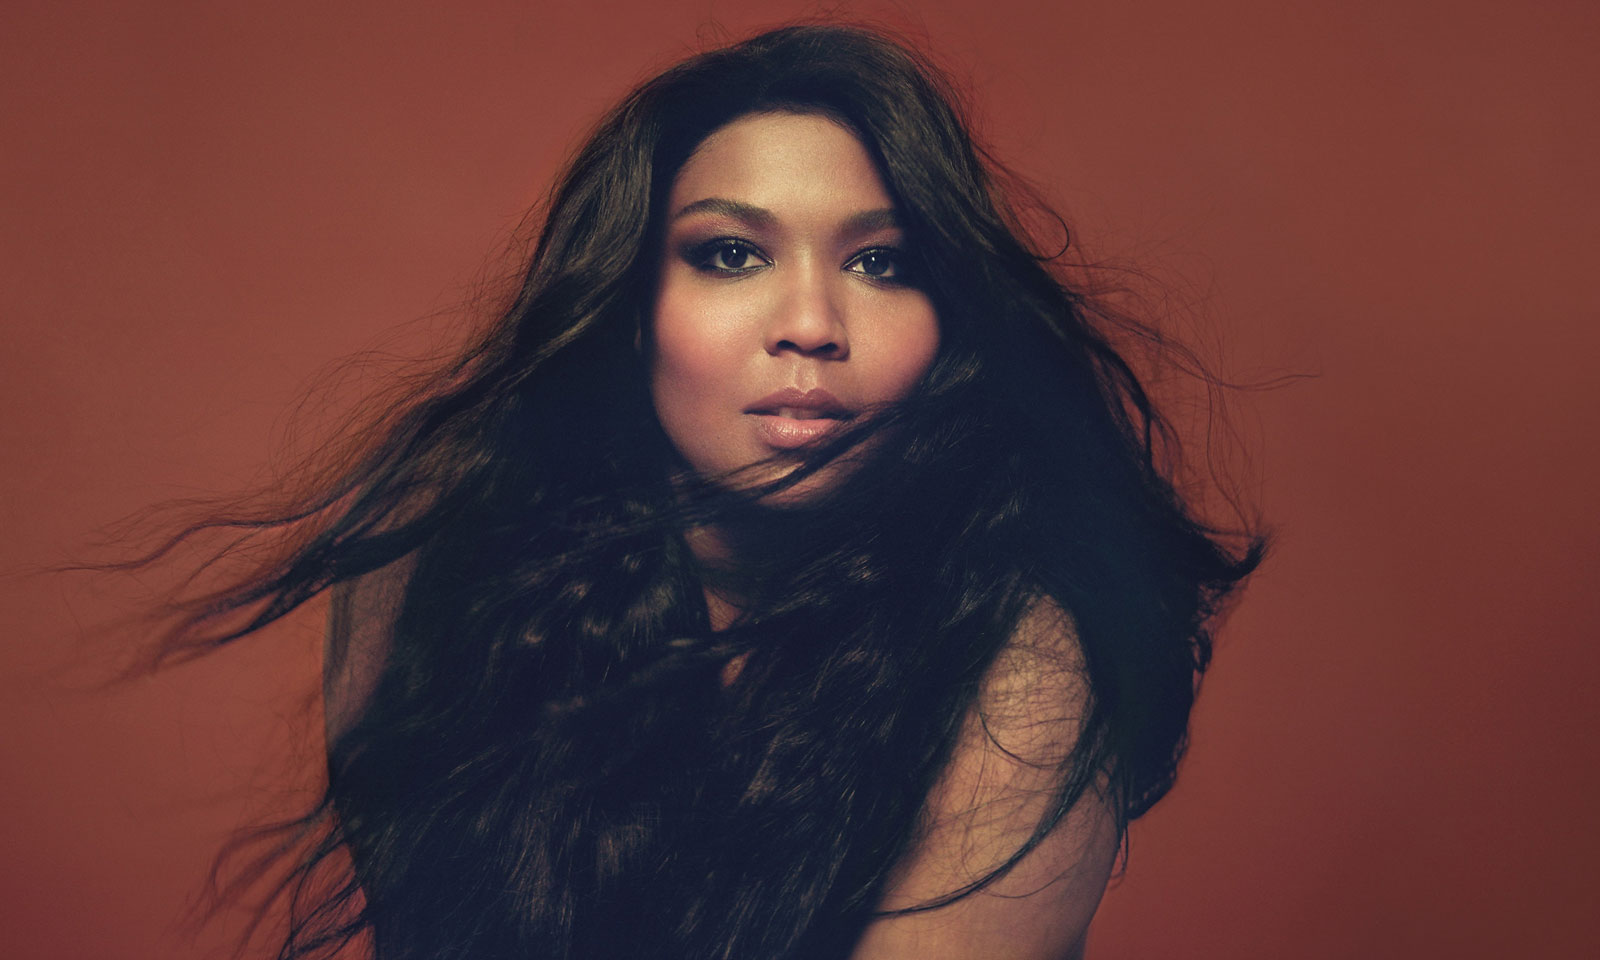 Absolut Vodka and singer Lizzo